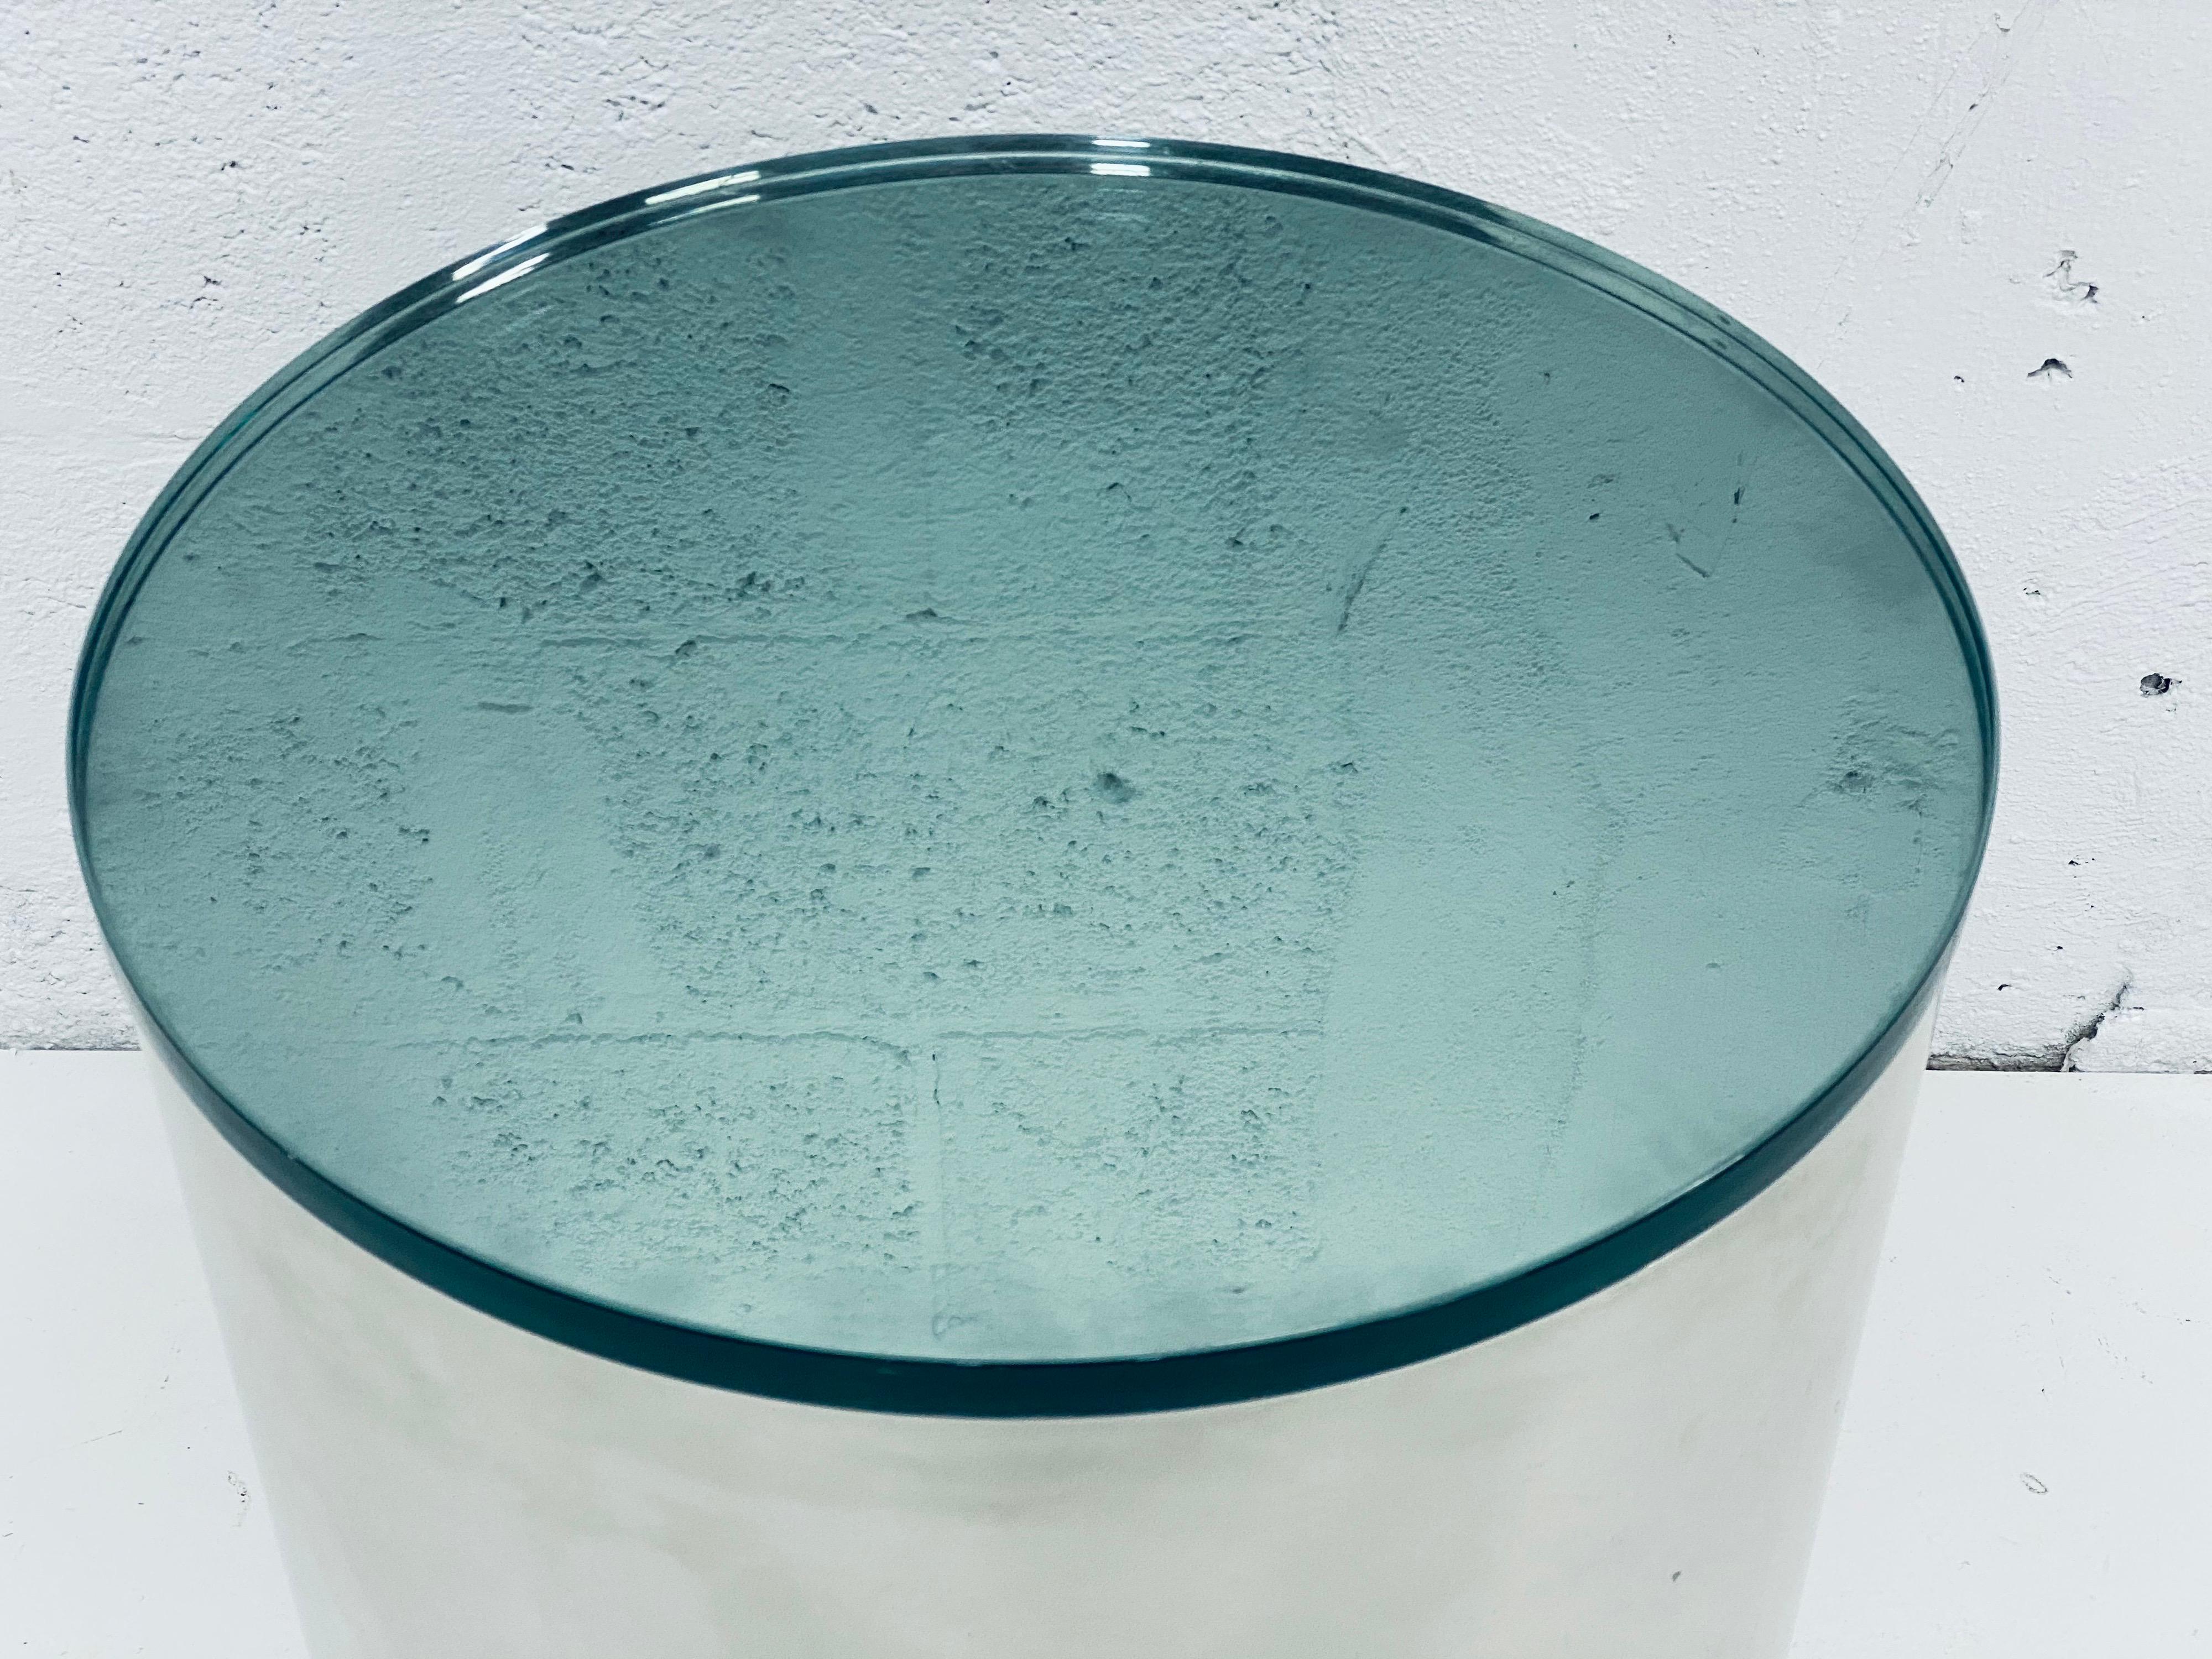 Paul Mayen Polished Steel and Glass Side Table for Habitat, 1970s For Sale 7